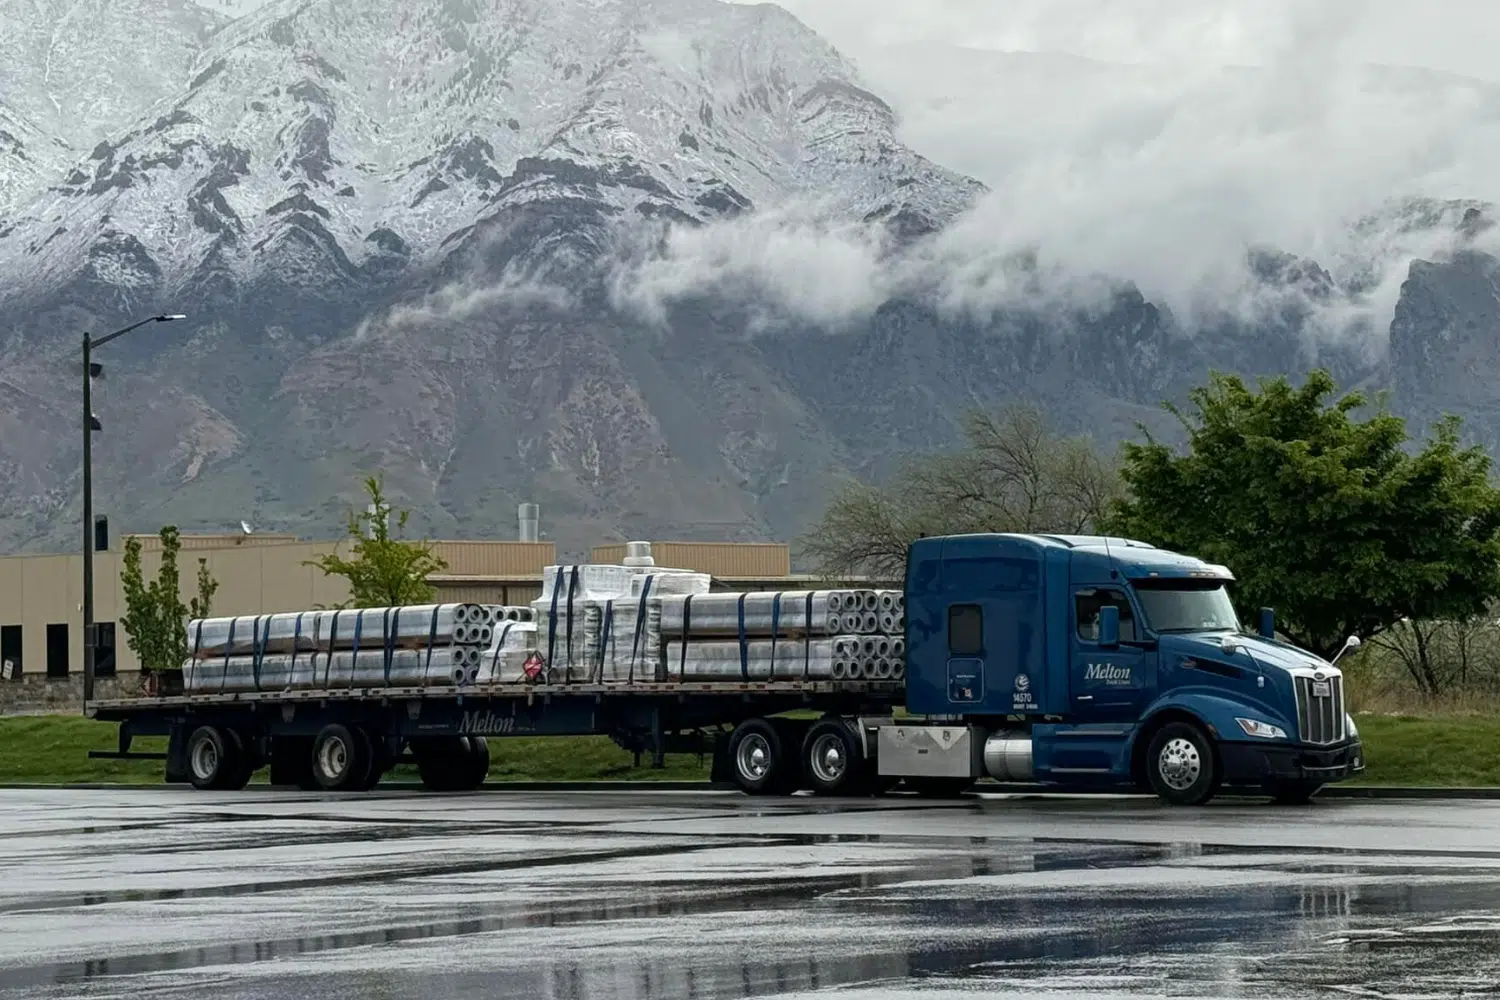 A Melton truck with a secured load parked in front of a mountain